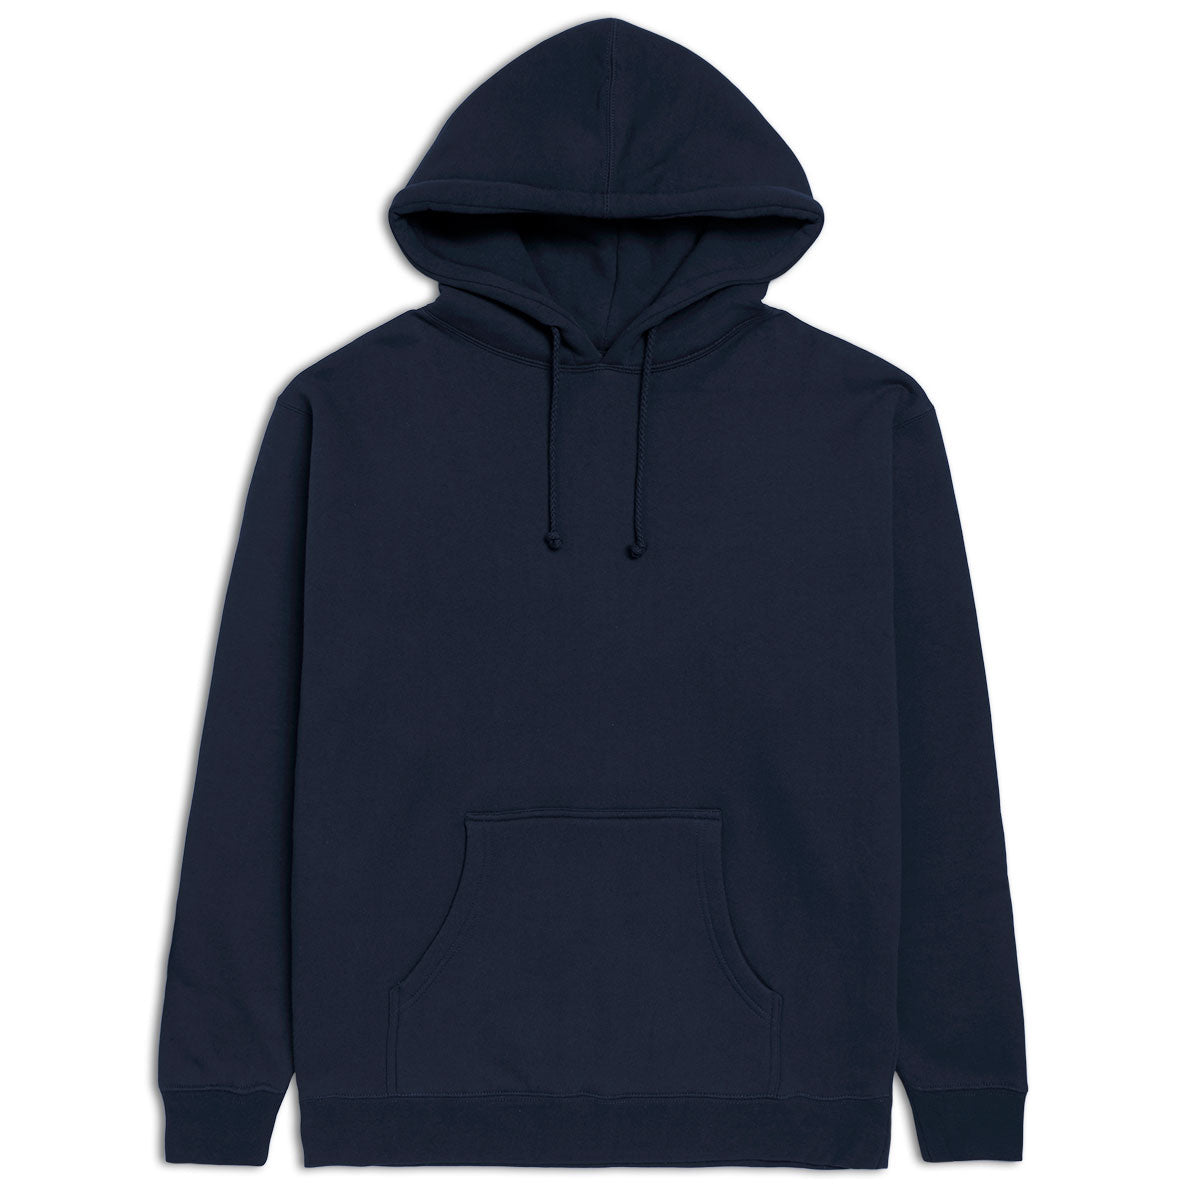 CCS Staple Pullover Hoodie - Navy image 1